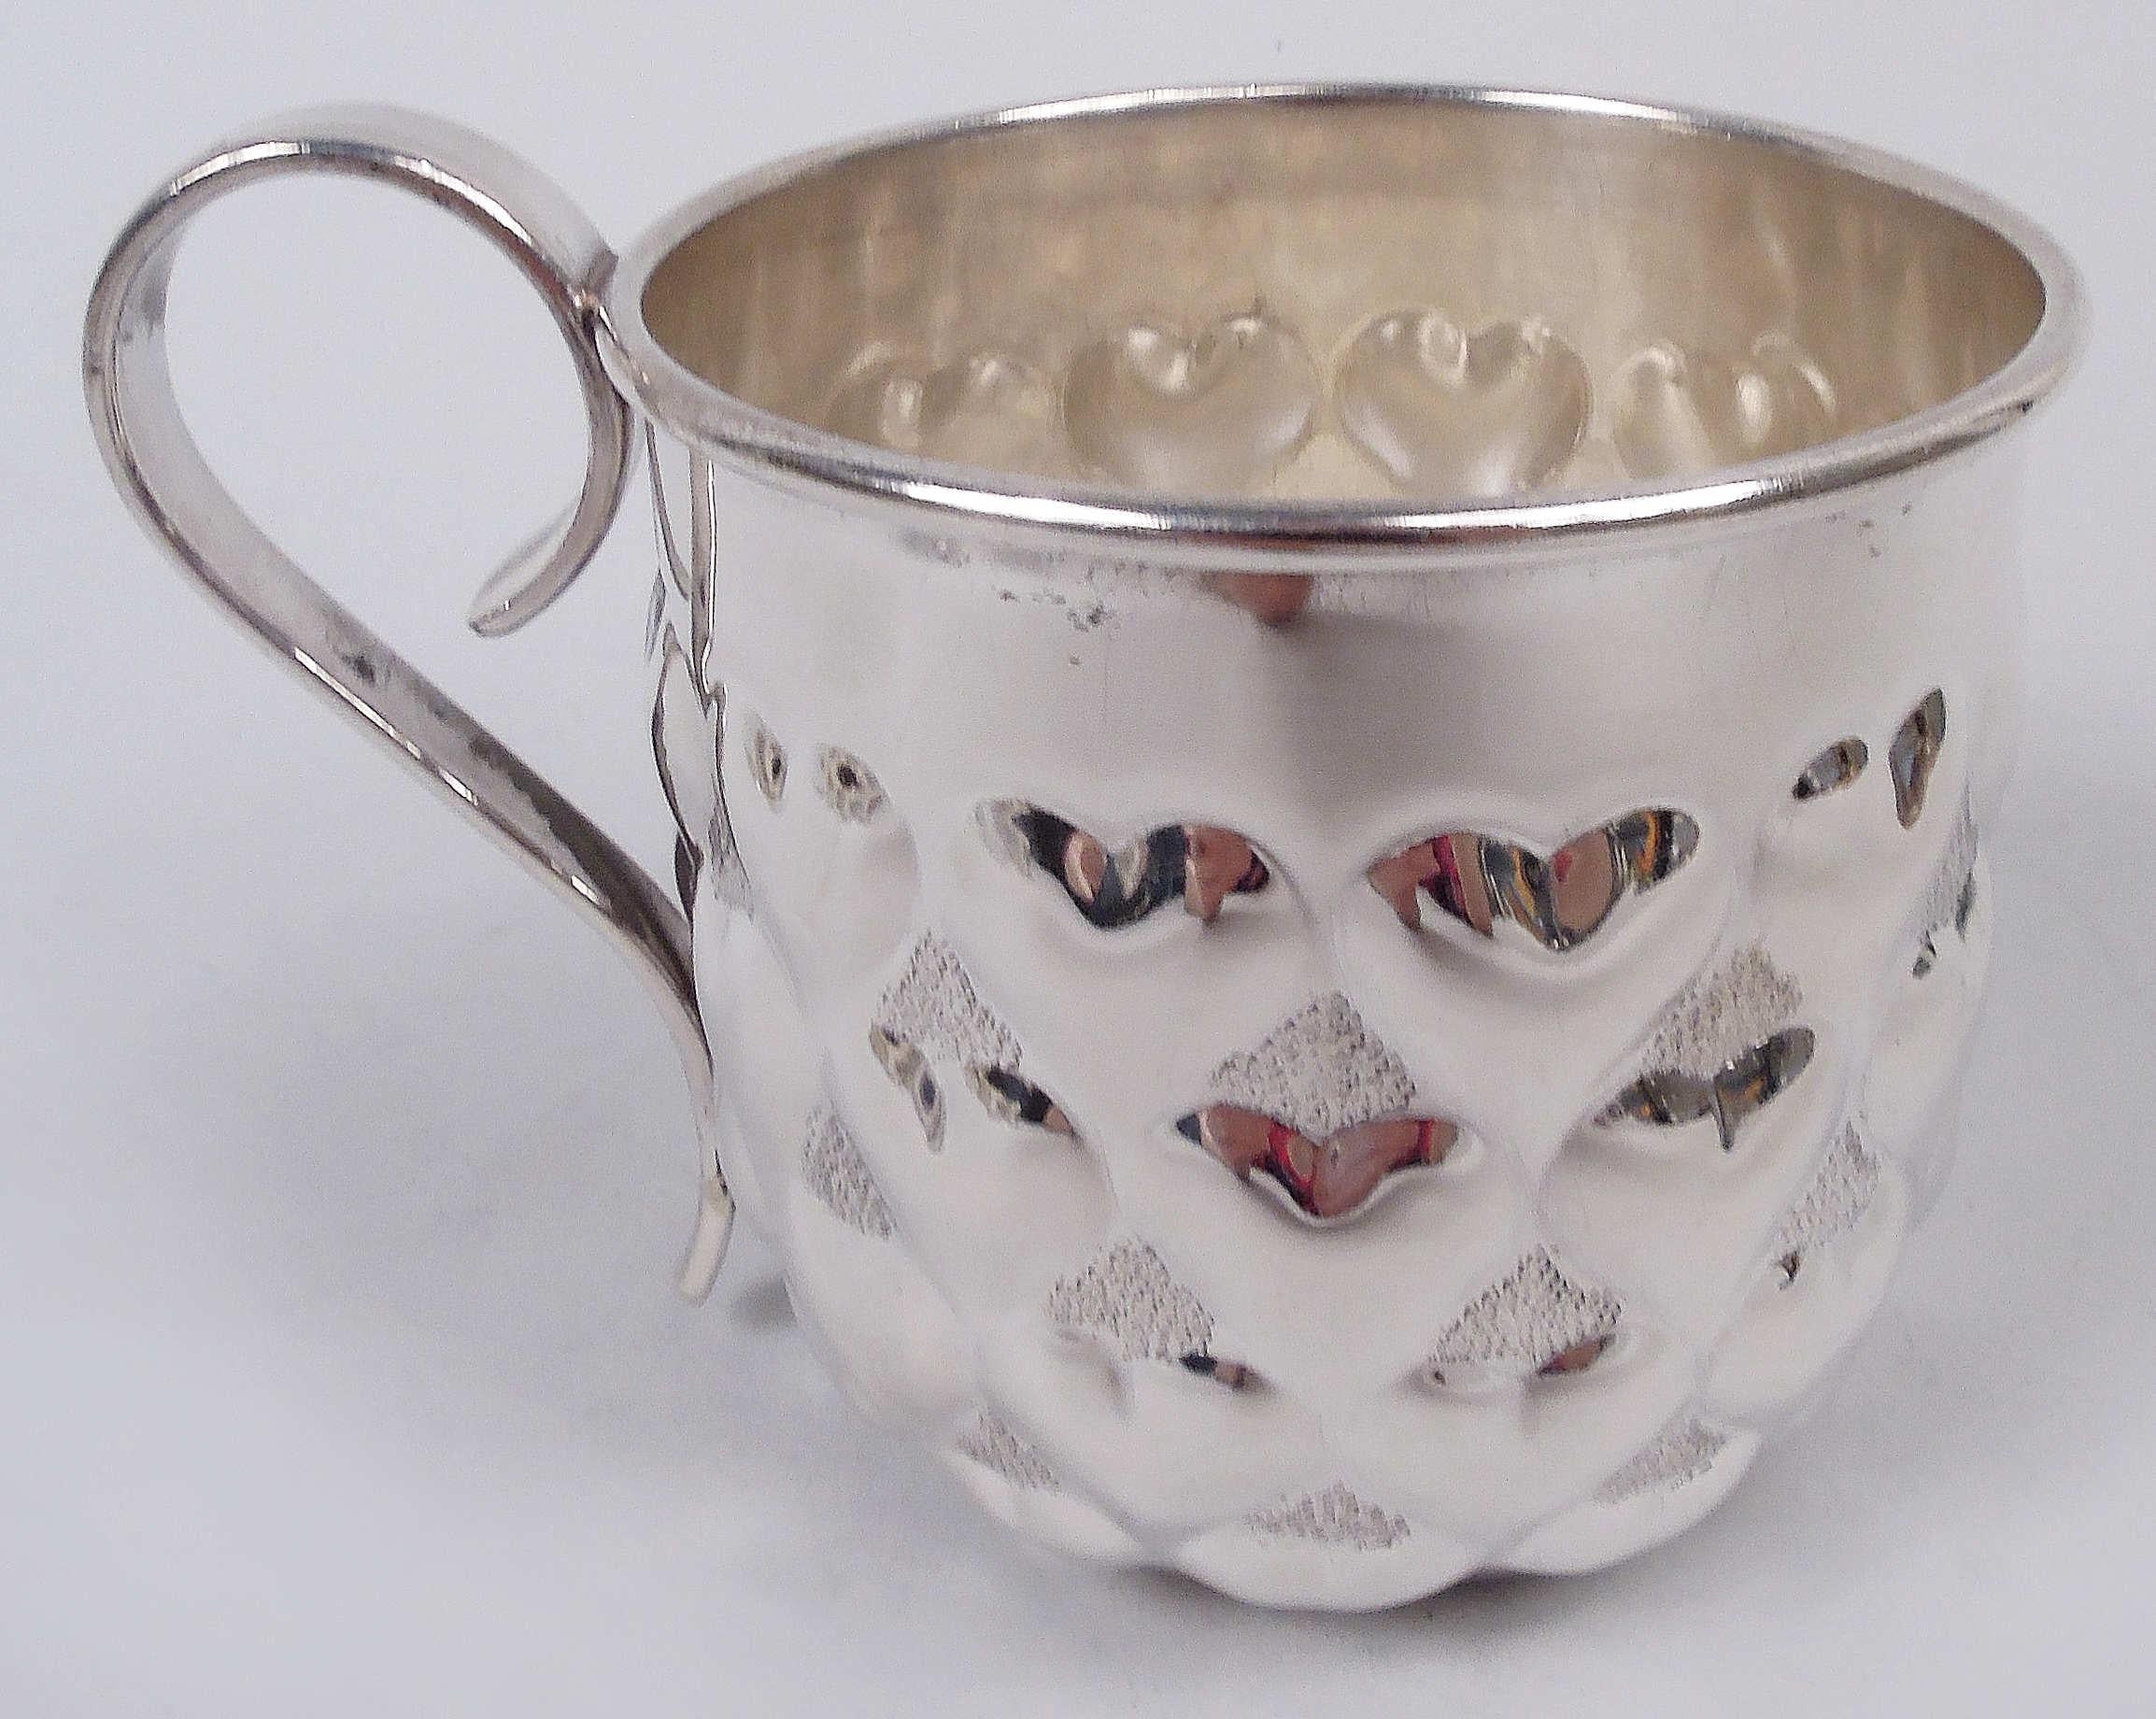 Italian Tiffany Modern Sterling Silver Baby Cup with Lovey-Dovey Hearts For Sale